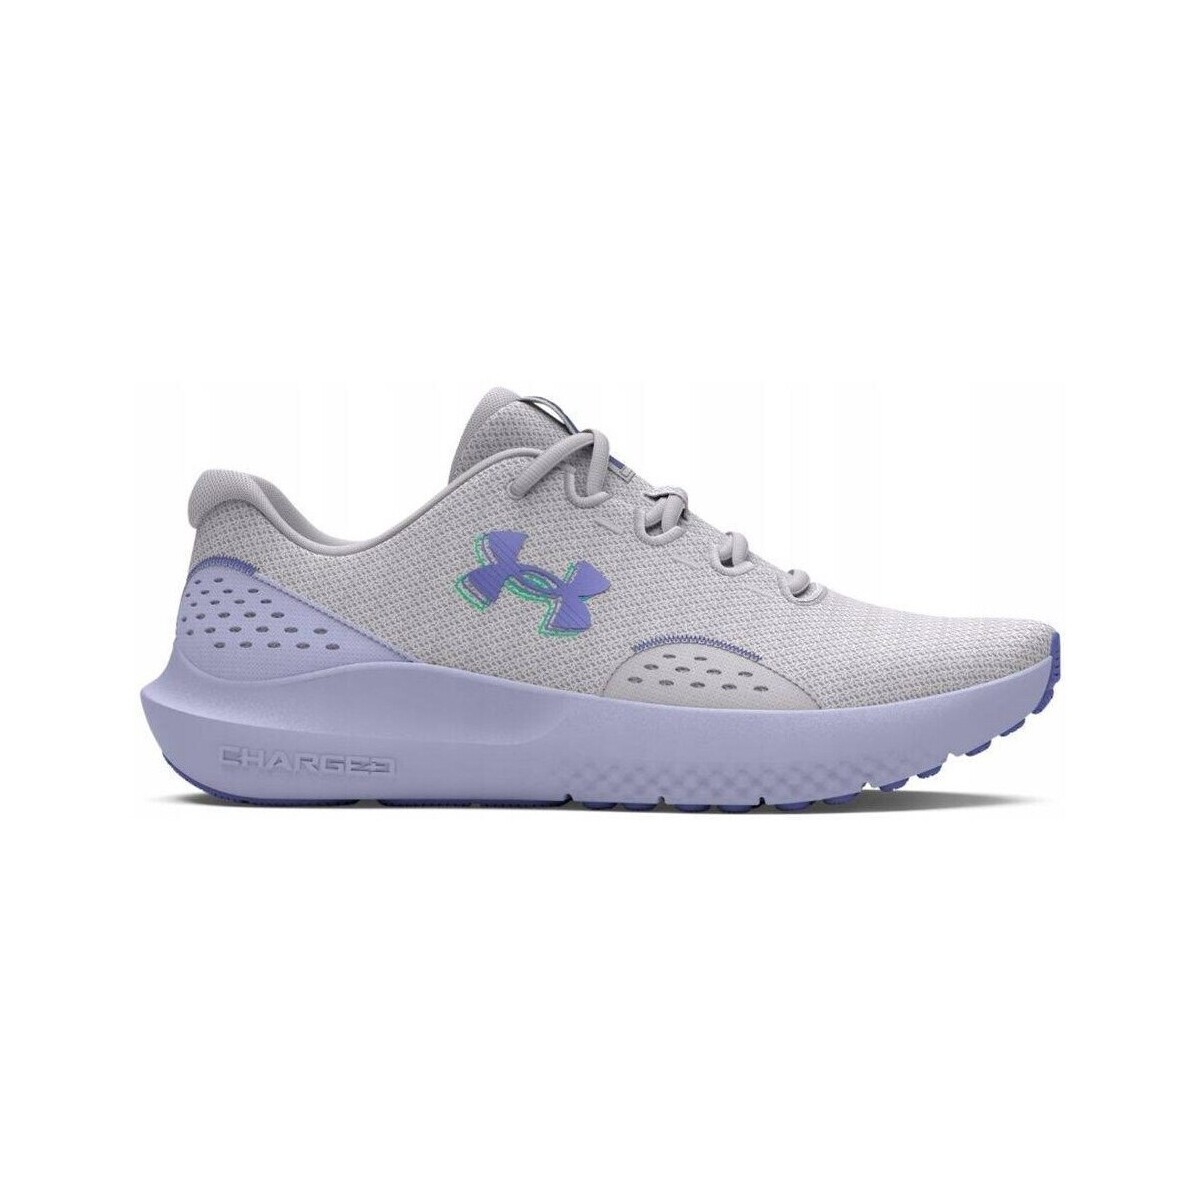 Under Armour Charged Surge 4 multicolour